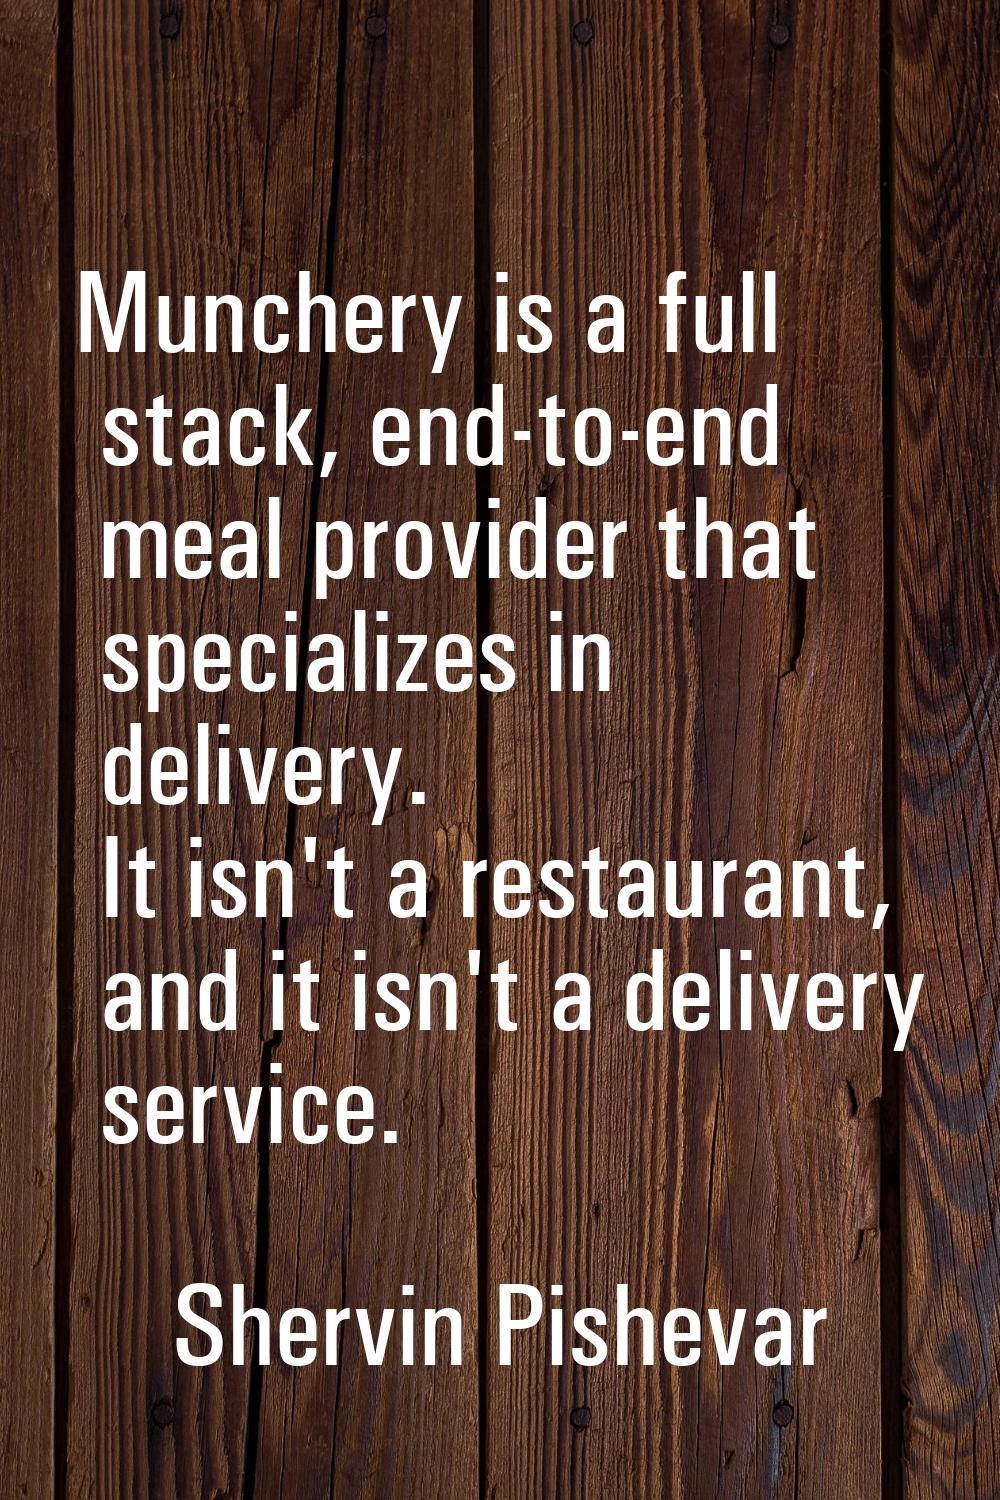 Munchery is a full stack, end-to-end meal provider that specializes in delivery. It isn't a restaur